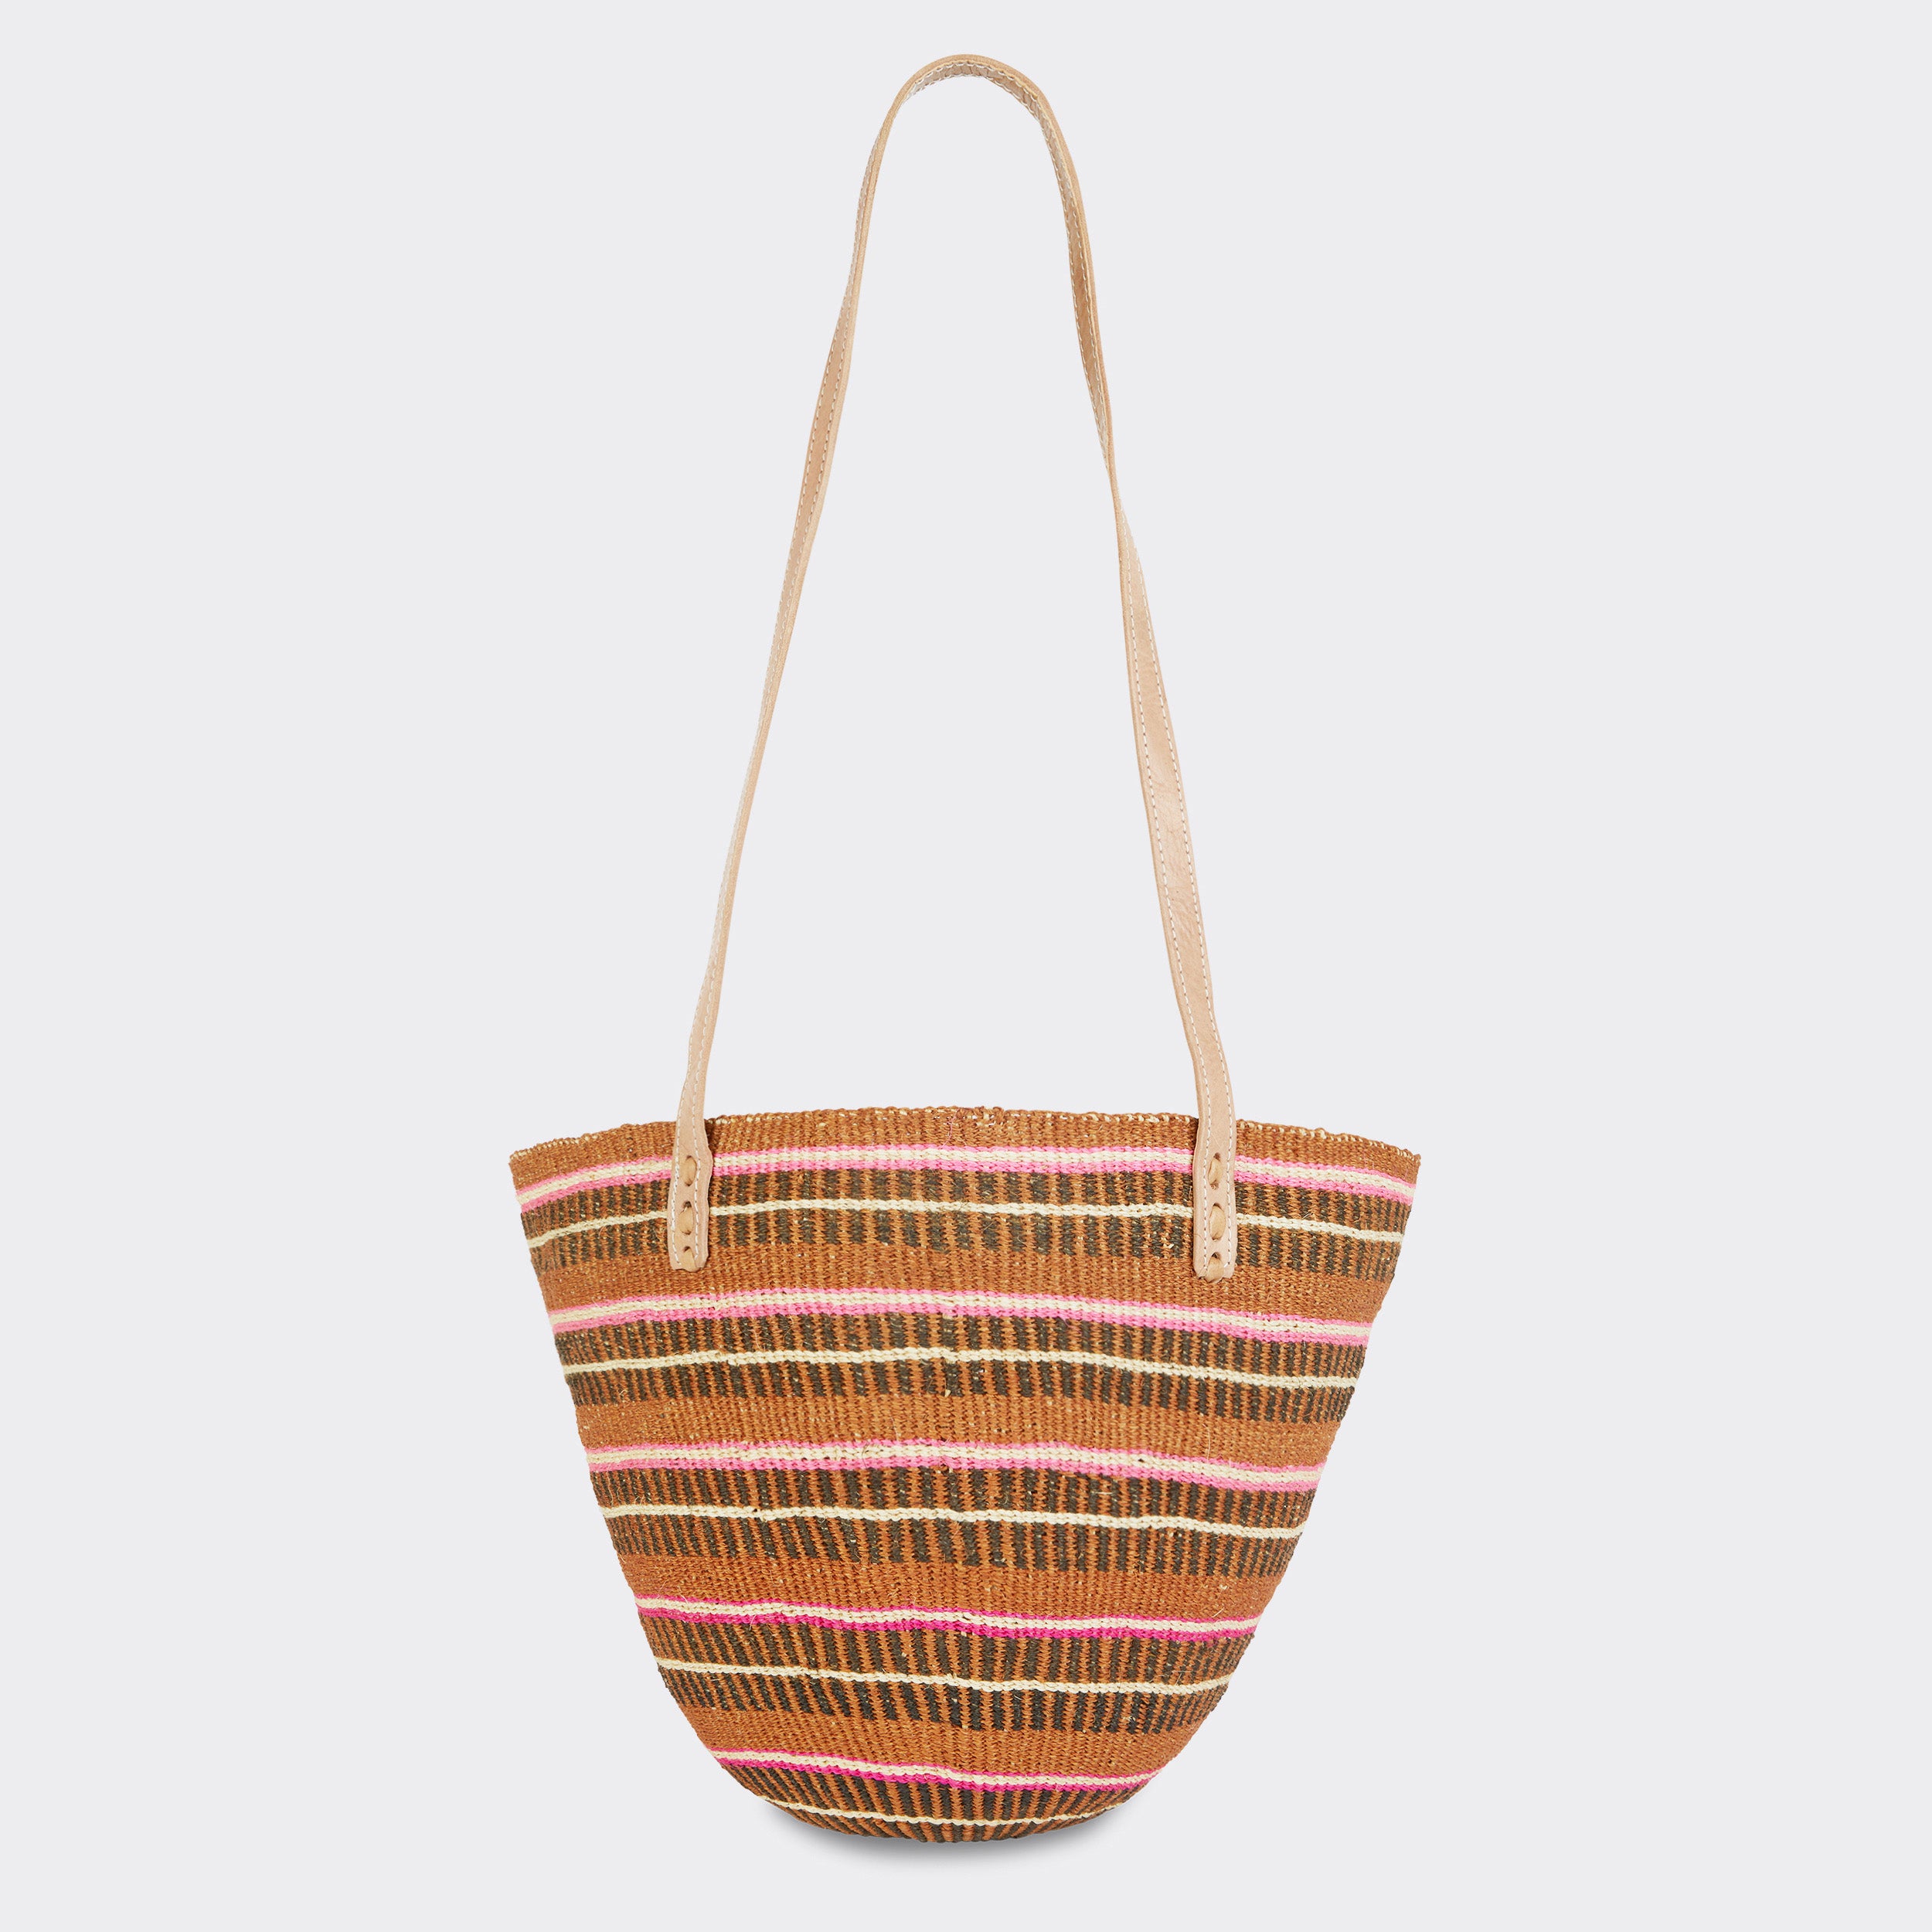 Still life:  Shopping Bag in Sisal Pink Stripes with the colors pink and brown.